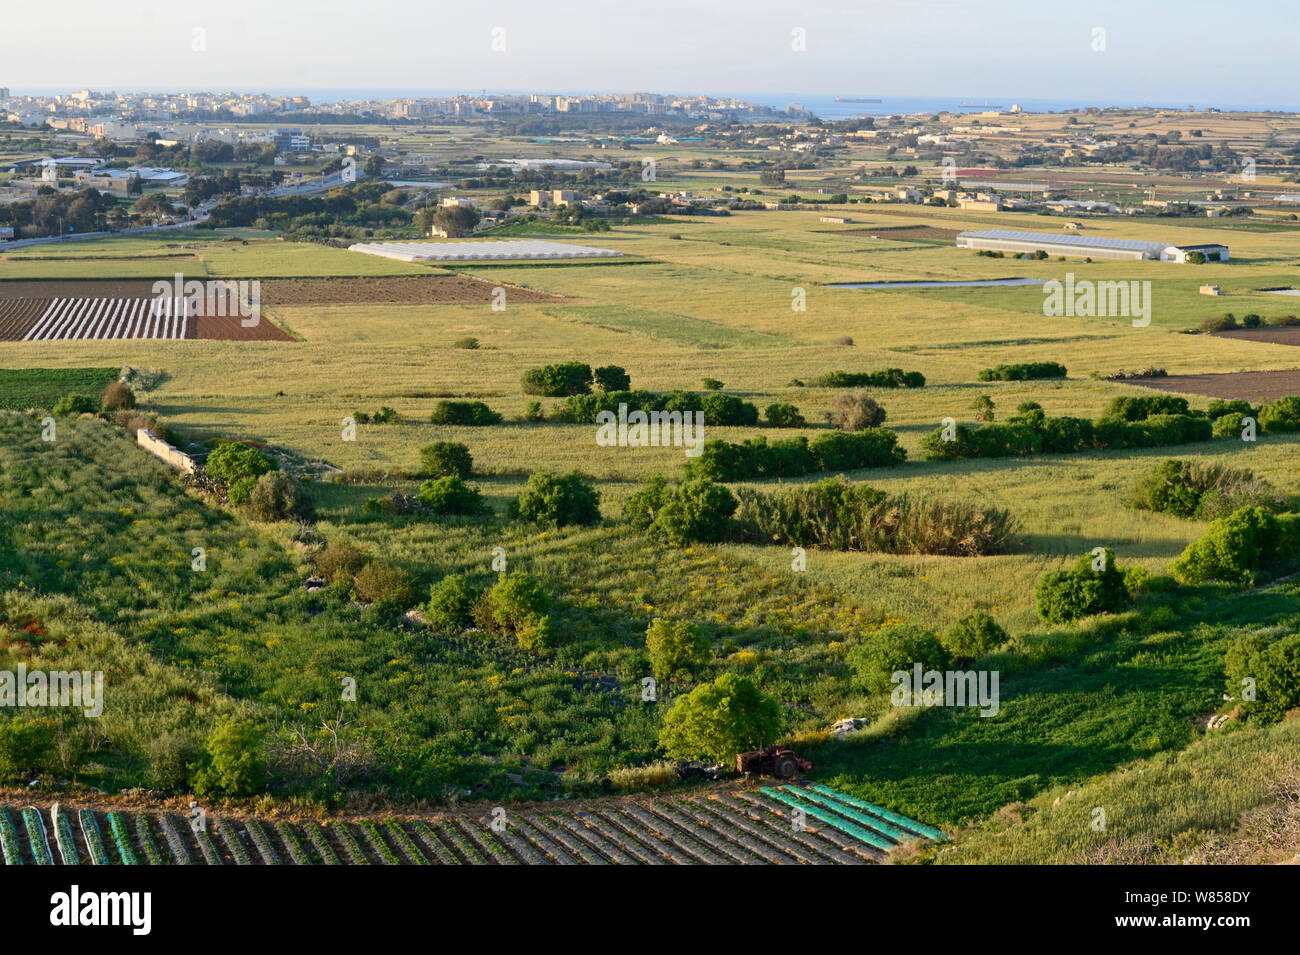 View across agricultural landscape from the Victoria Lines towards St Pauls, during BirdLife Malta Springwatch Camp, Malta, April 2013 Stock Photo